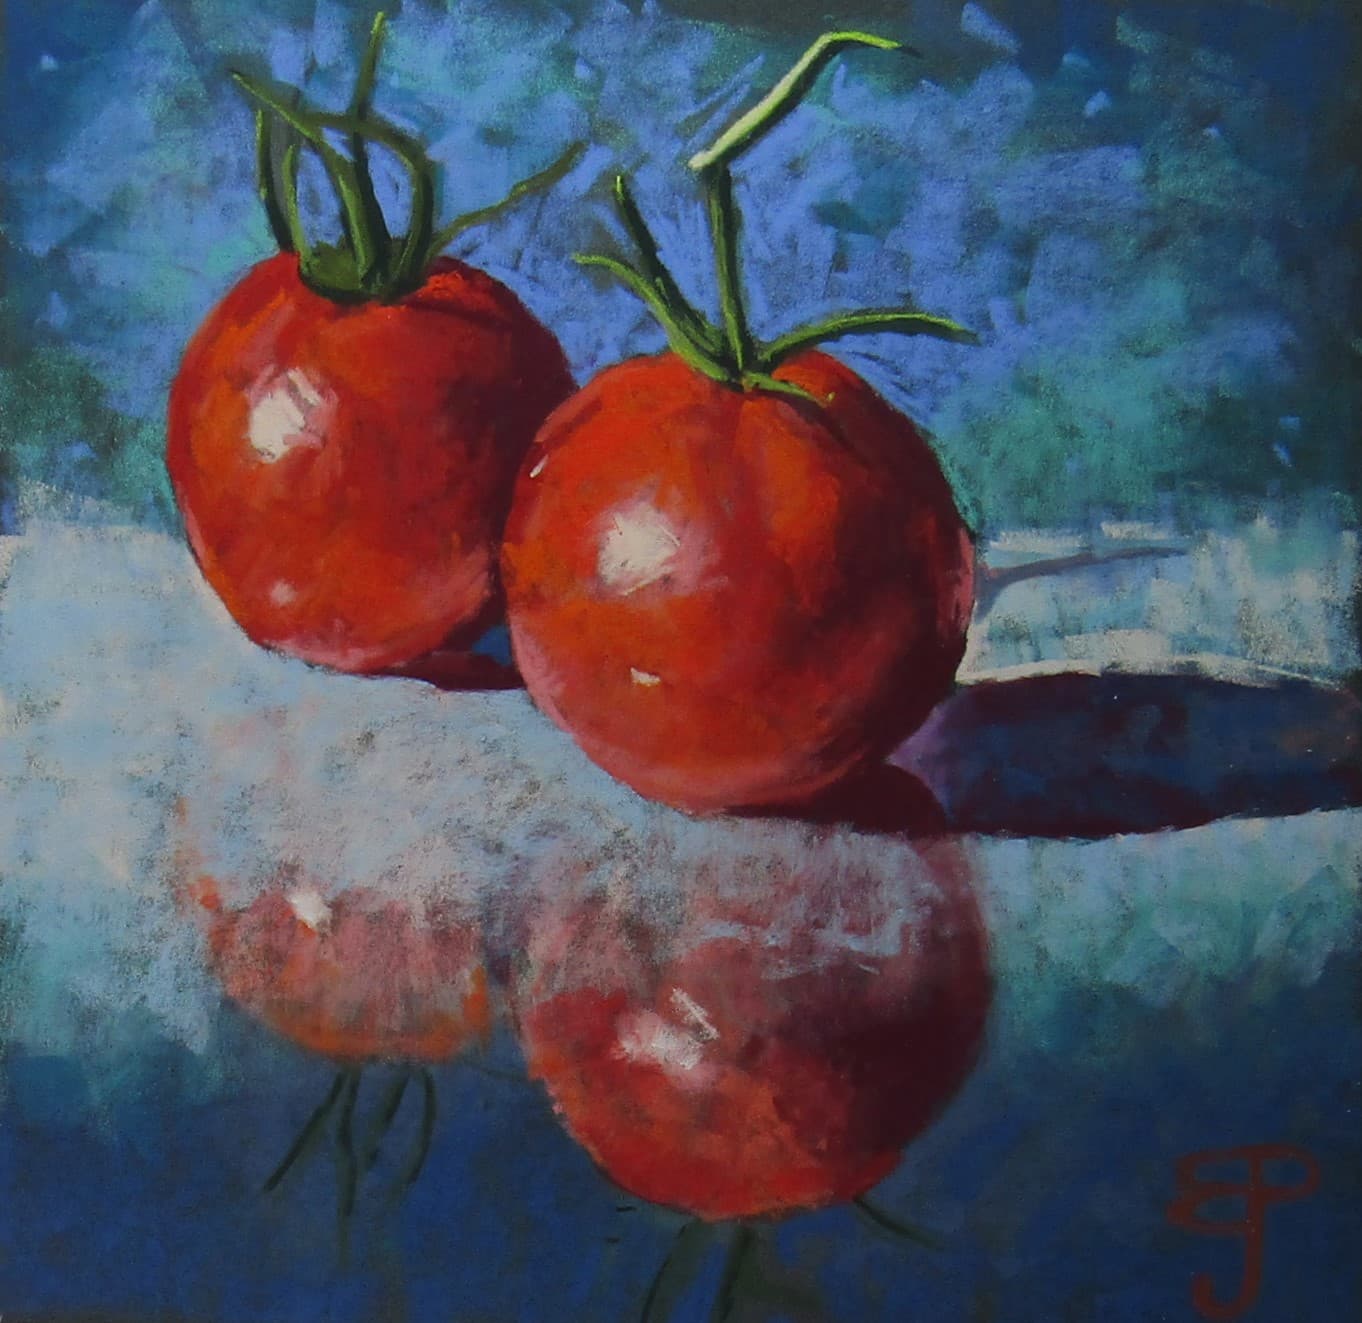 A pair of tomatoes